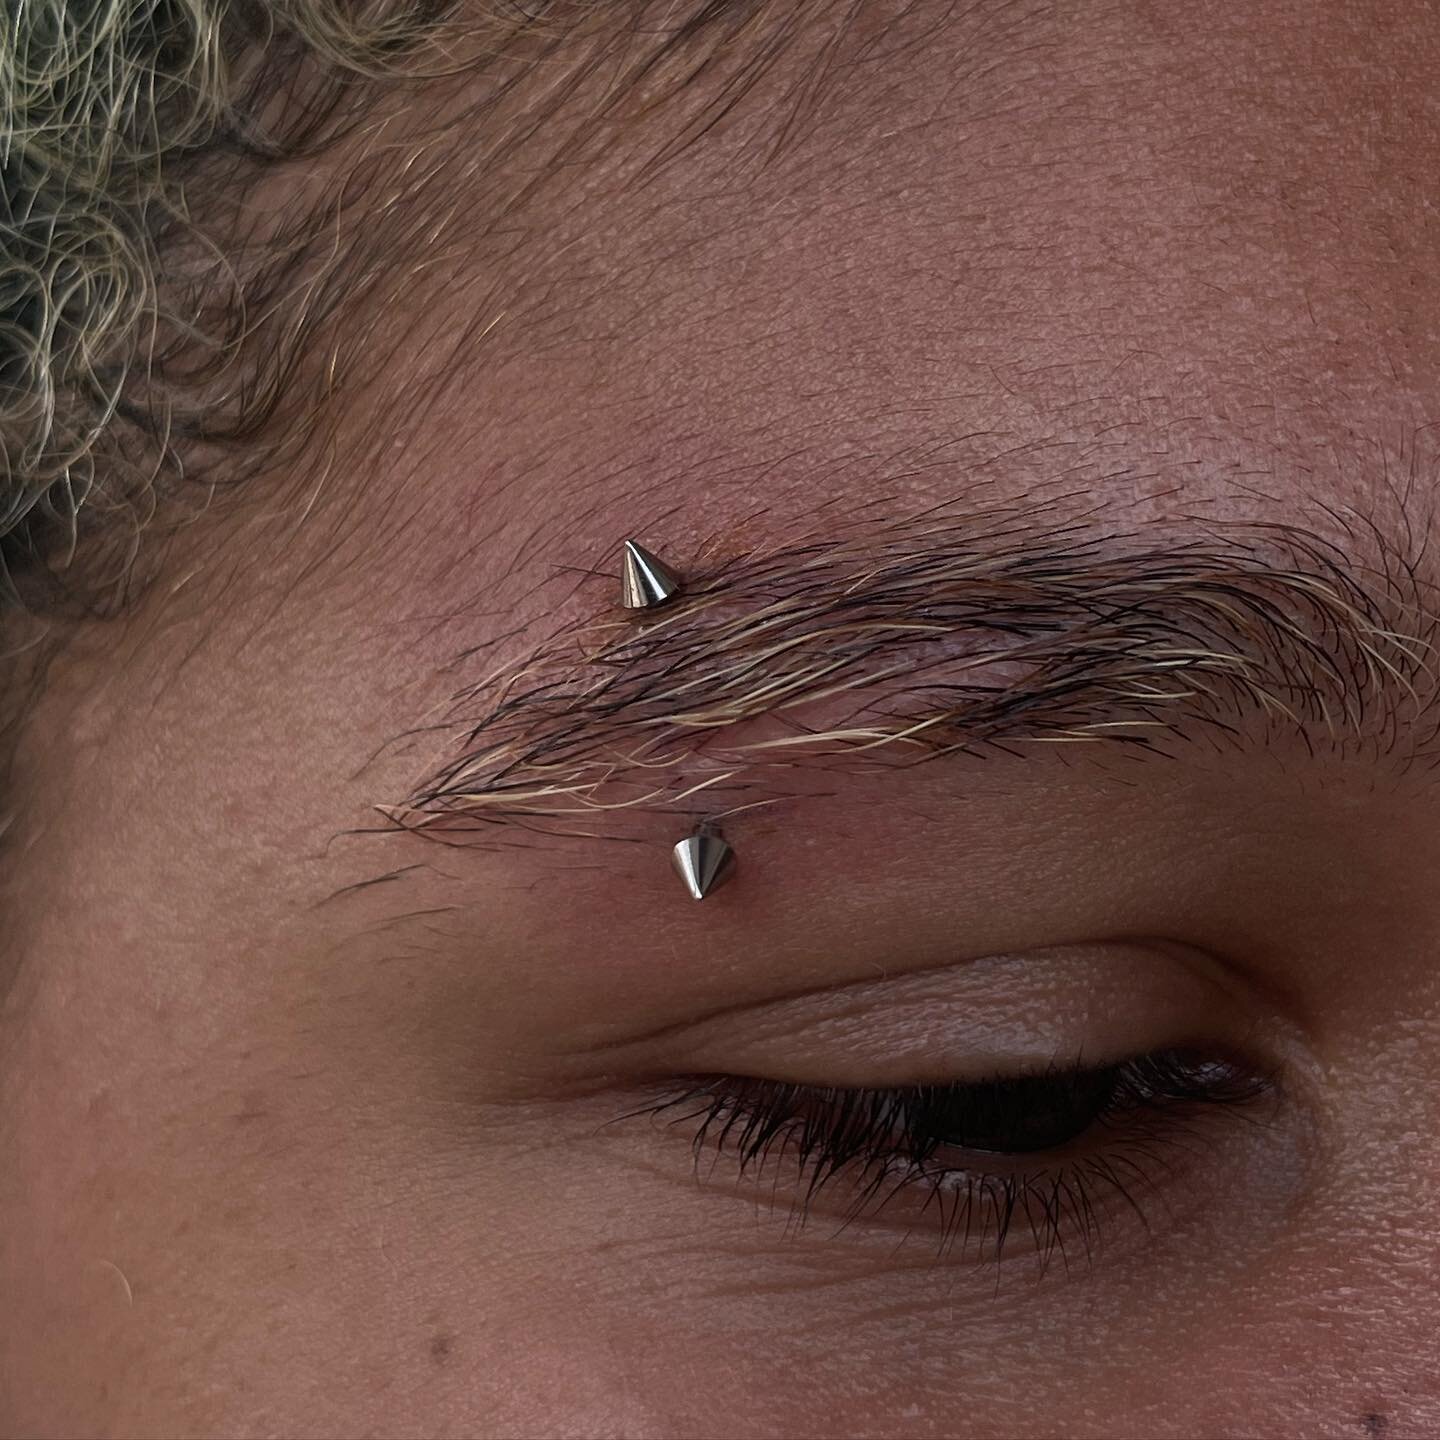 The black excellence and joy I&rsquo;ve experienced today makes me so grateful ✨here&rsquo;s an eyebrow I just did with lil spikey bois! I have availability this weekend let&rsquo;s do somethin cool 🥹